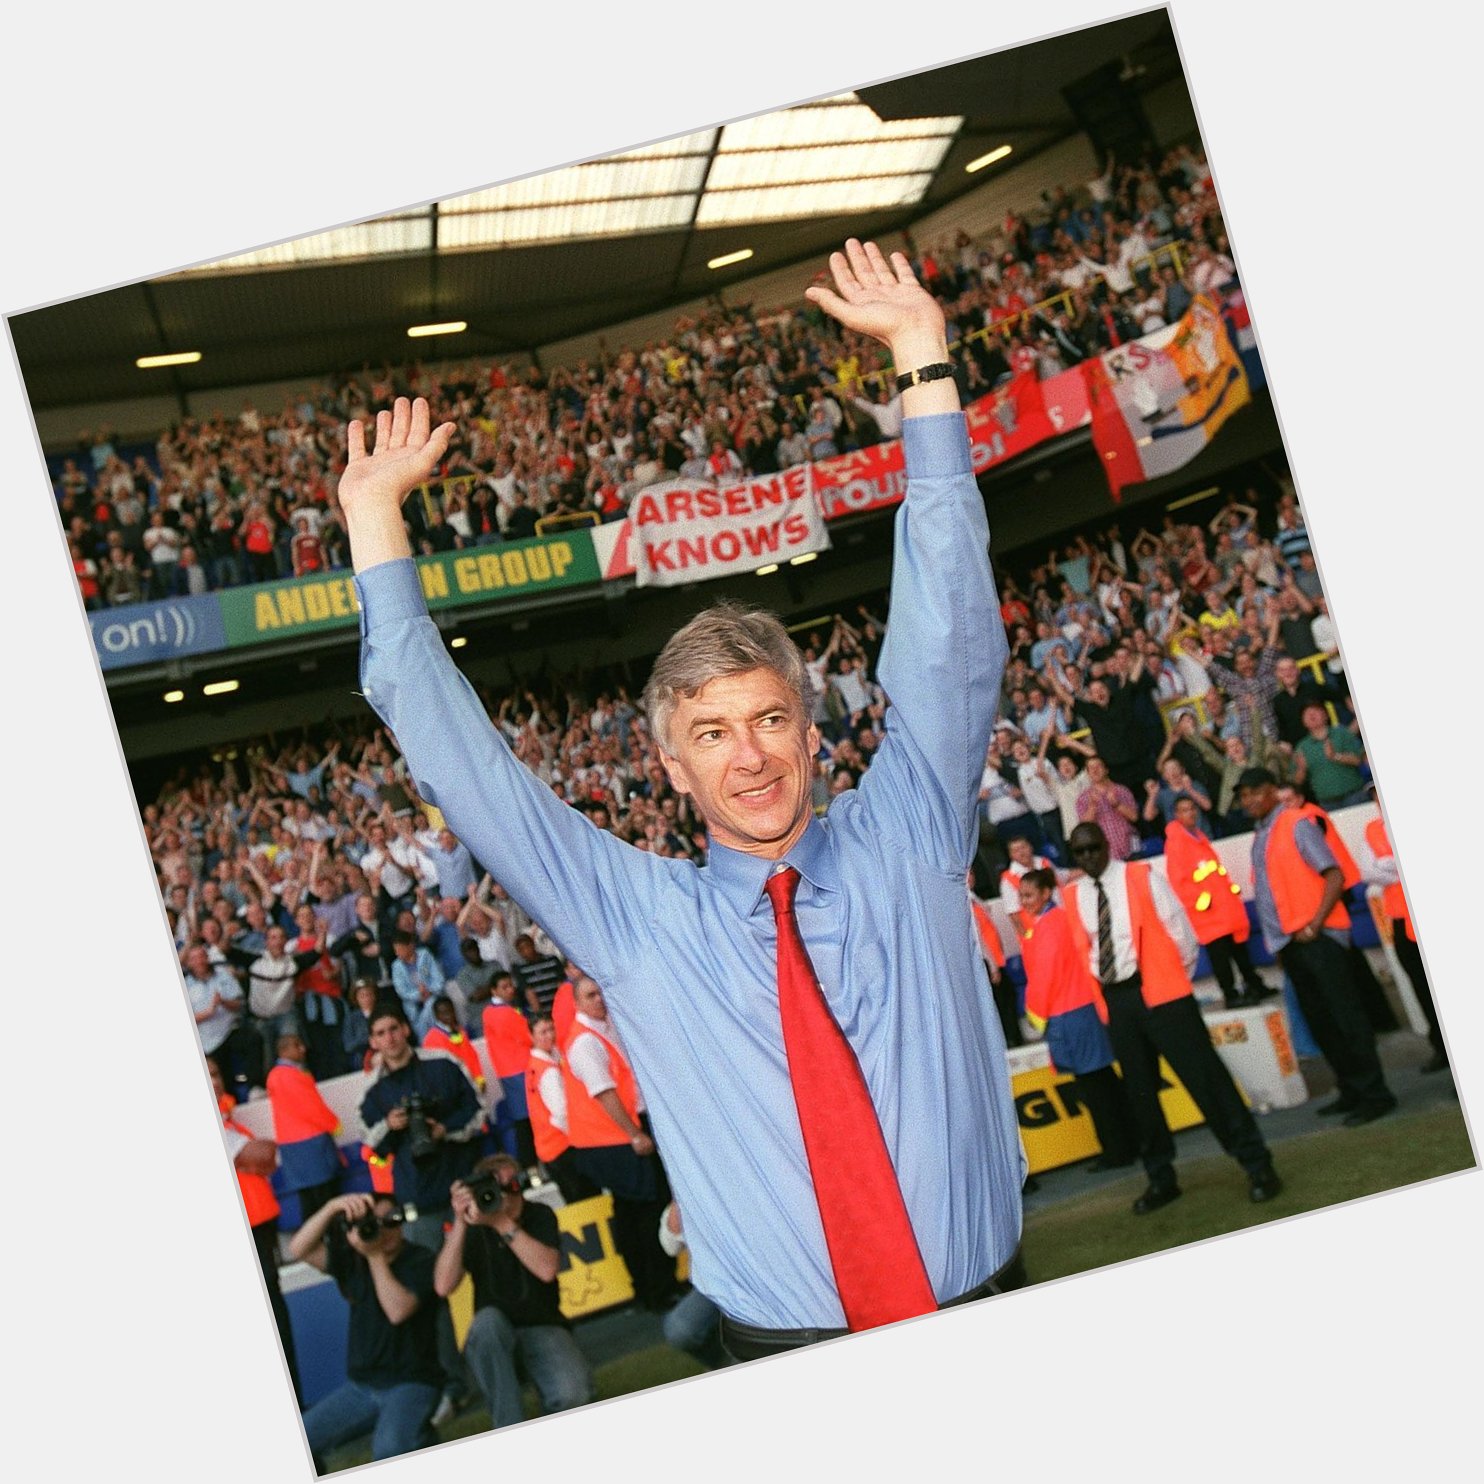 Happy 72nd birthday Arsene Wenger. Arsenal fans miss you. The Invincible Coach 